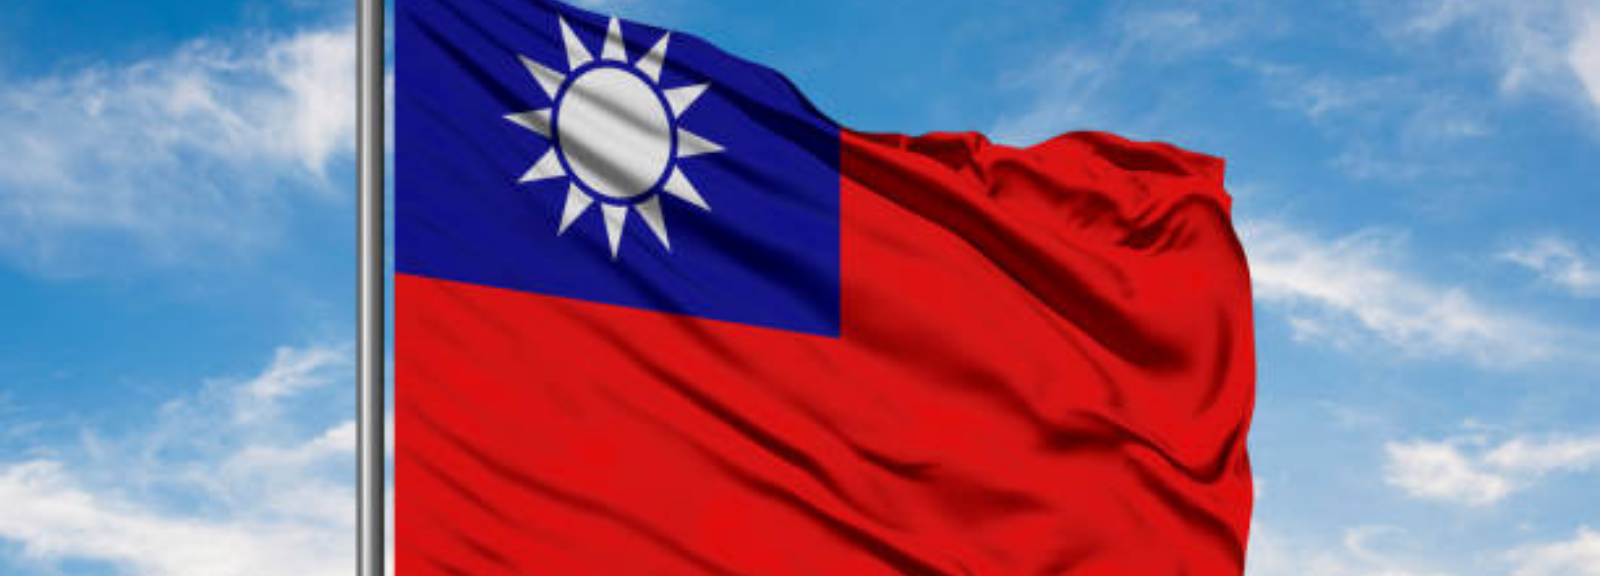 The flag of Taiwan.